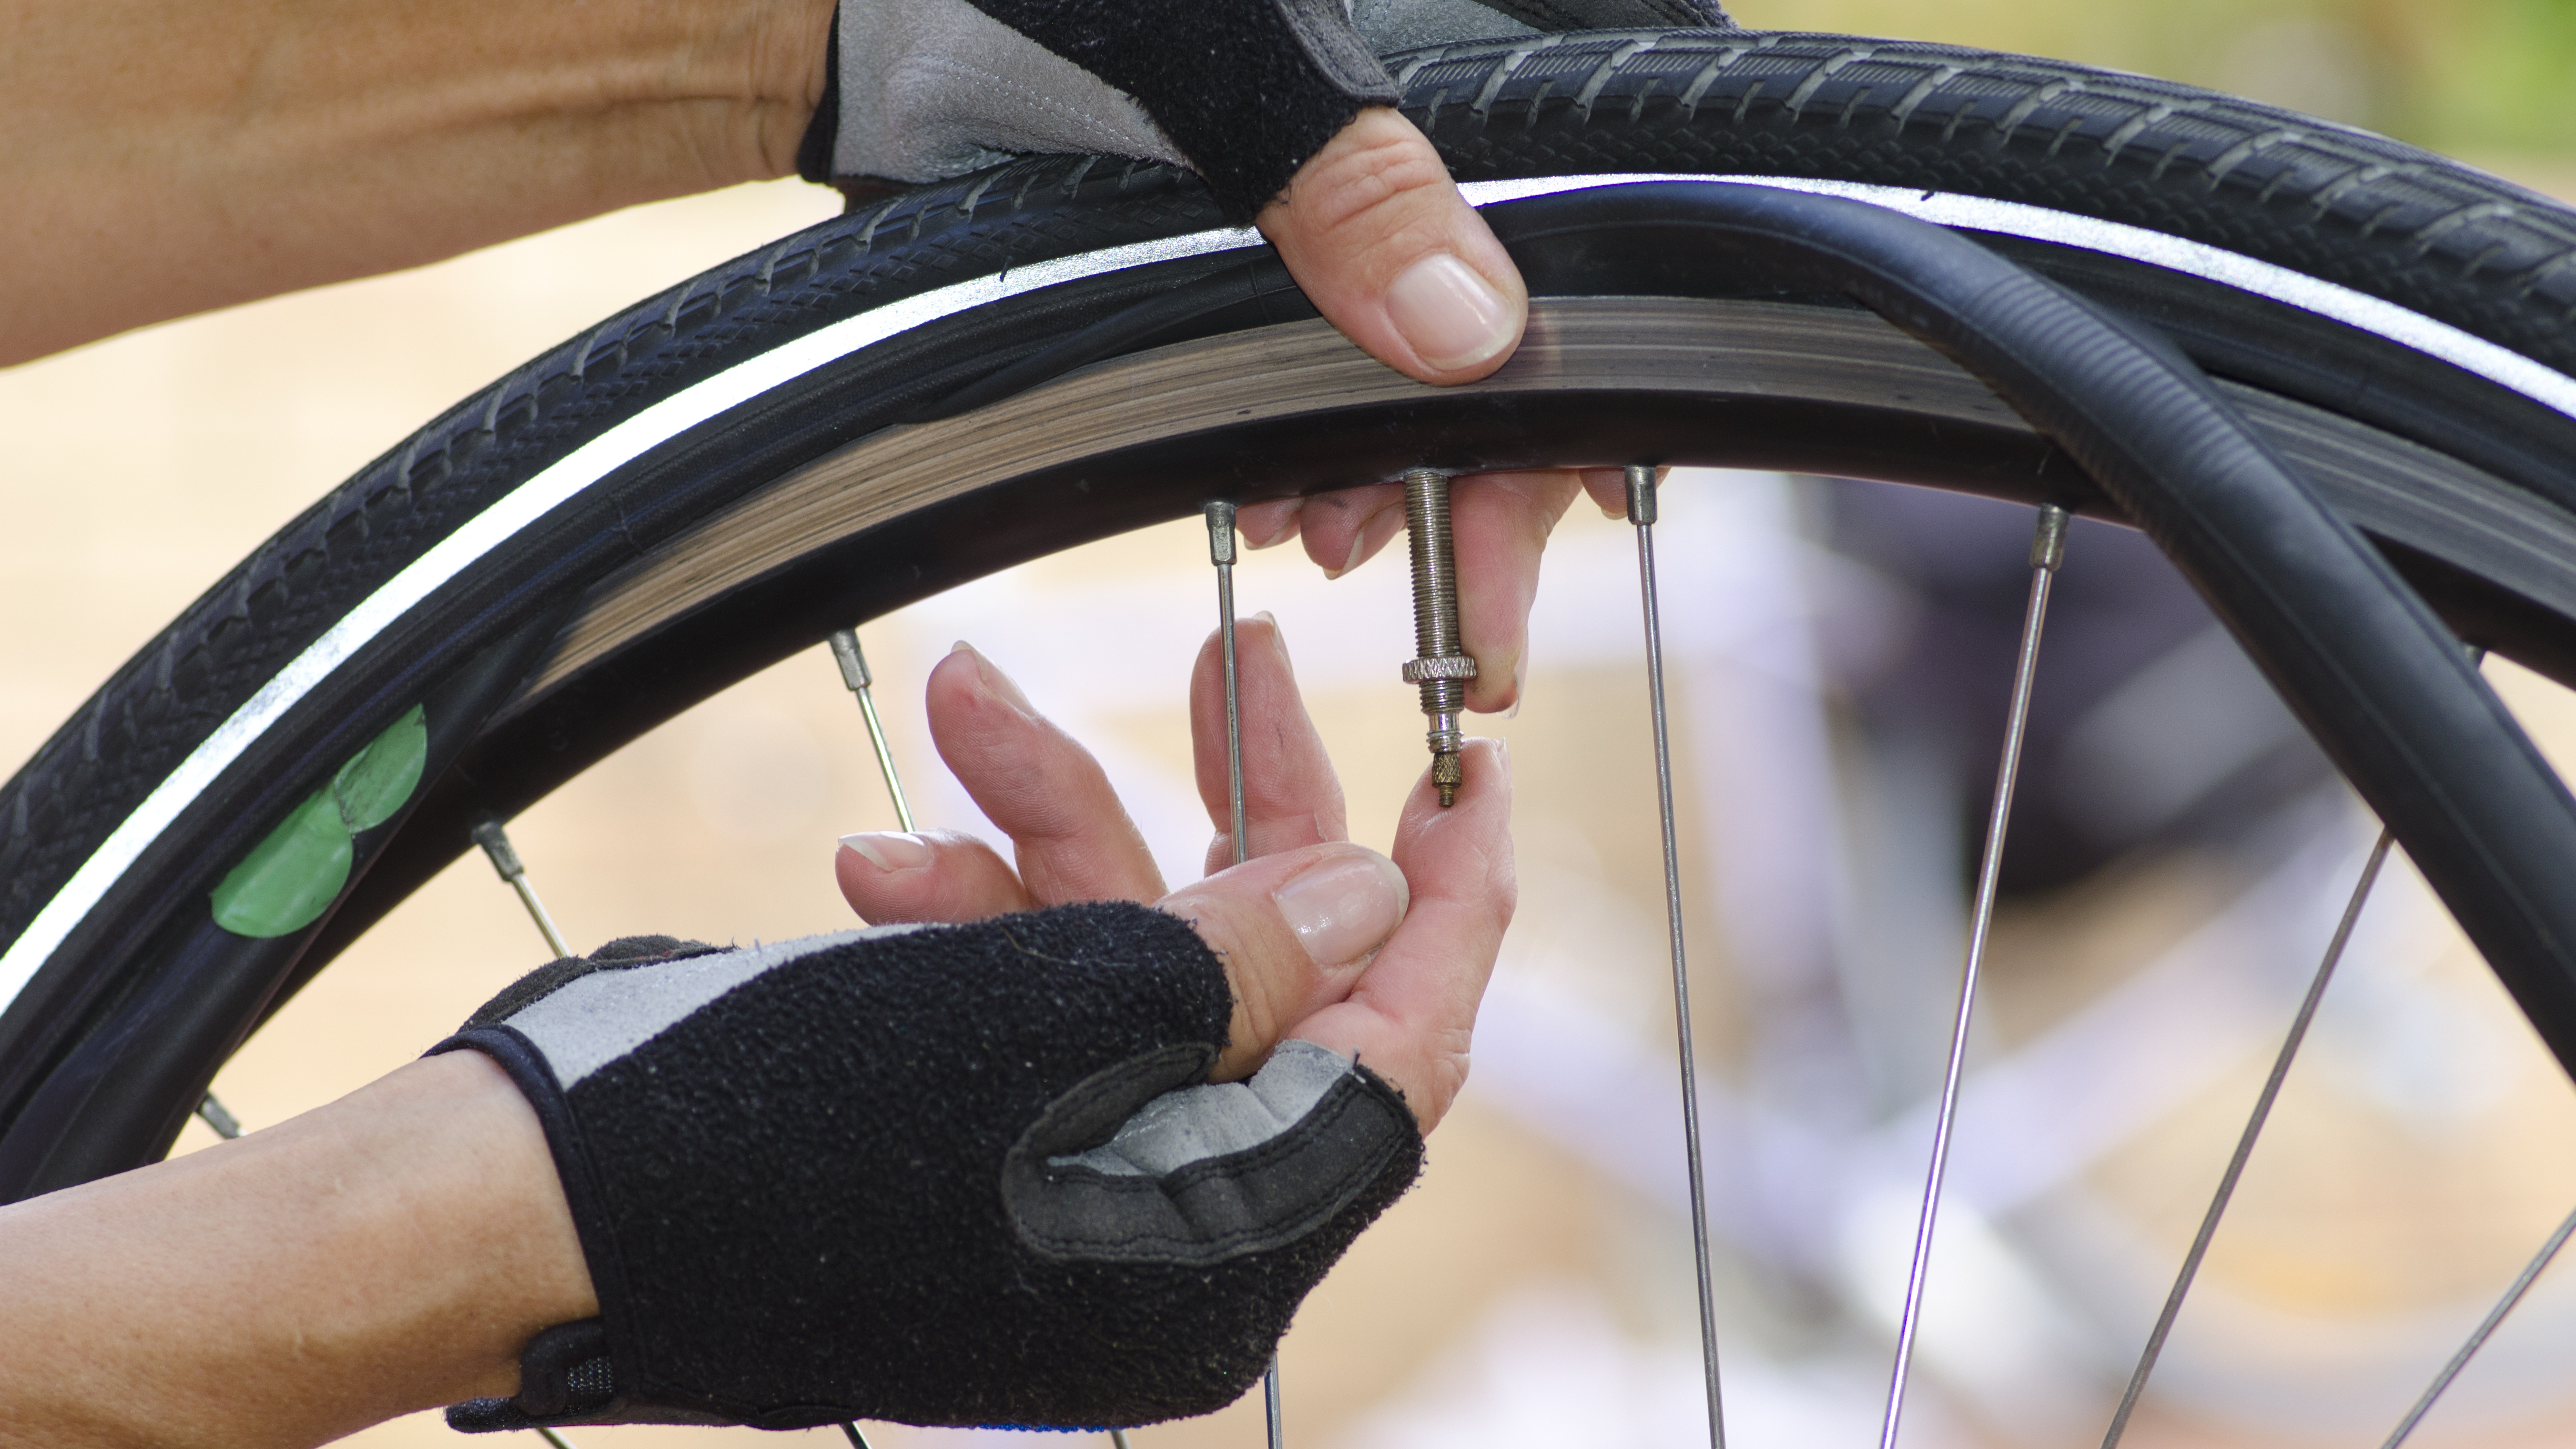 a person's hands adjusting the inner tube on a bike wheel